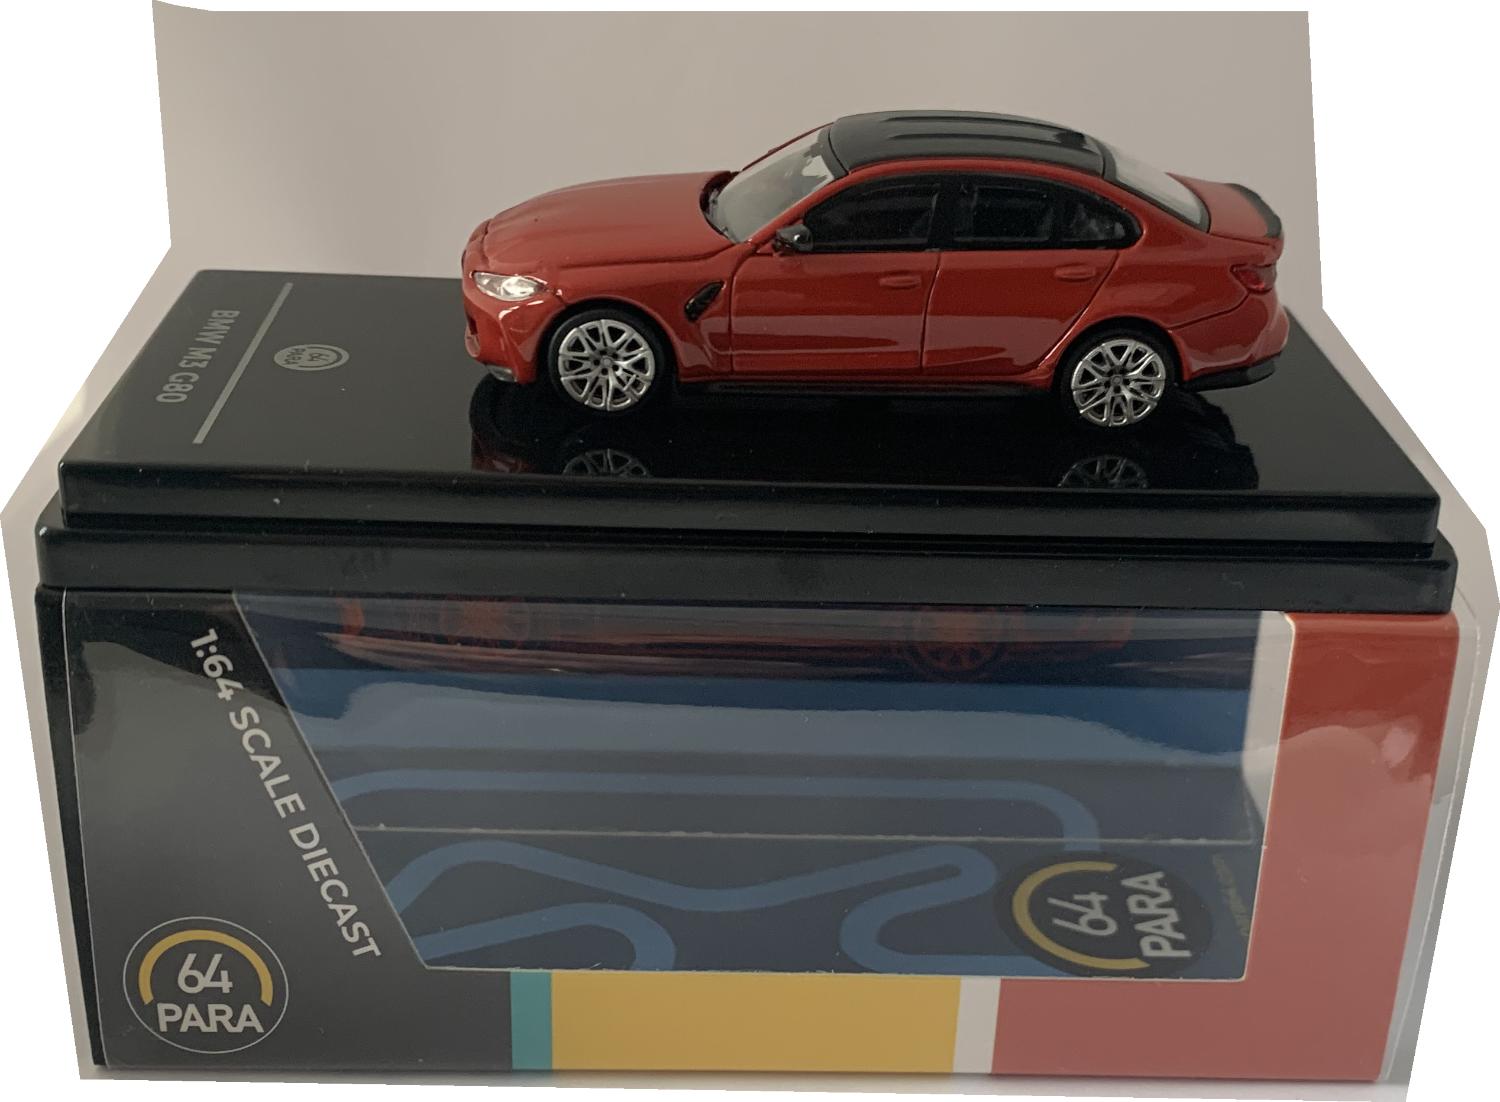 A good reproduction of the BMW M3 G80 mounted on a removable plinth and a removable hard plastic cover